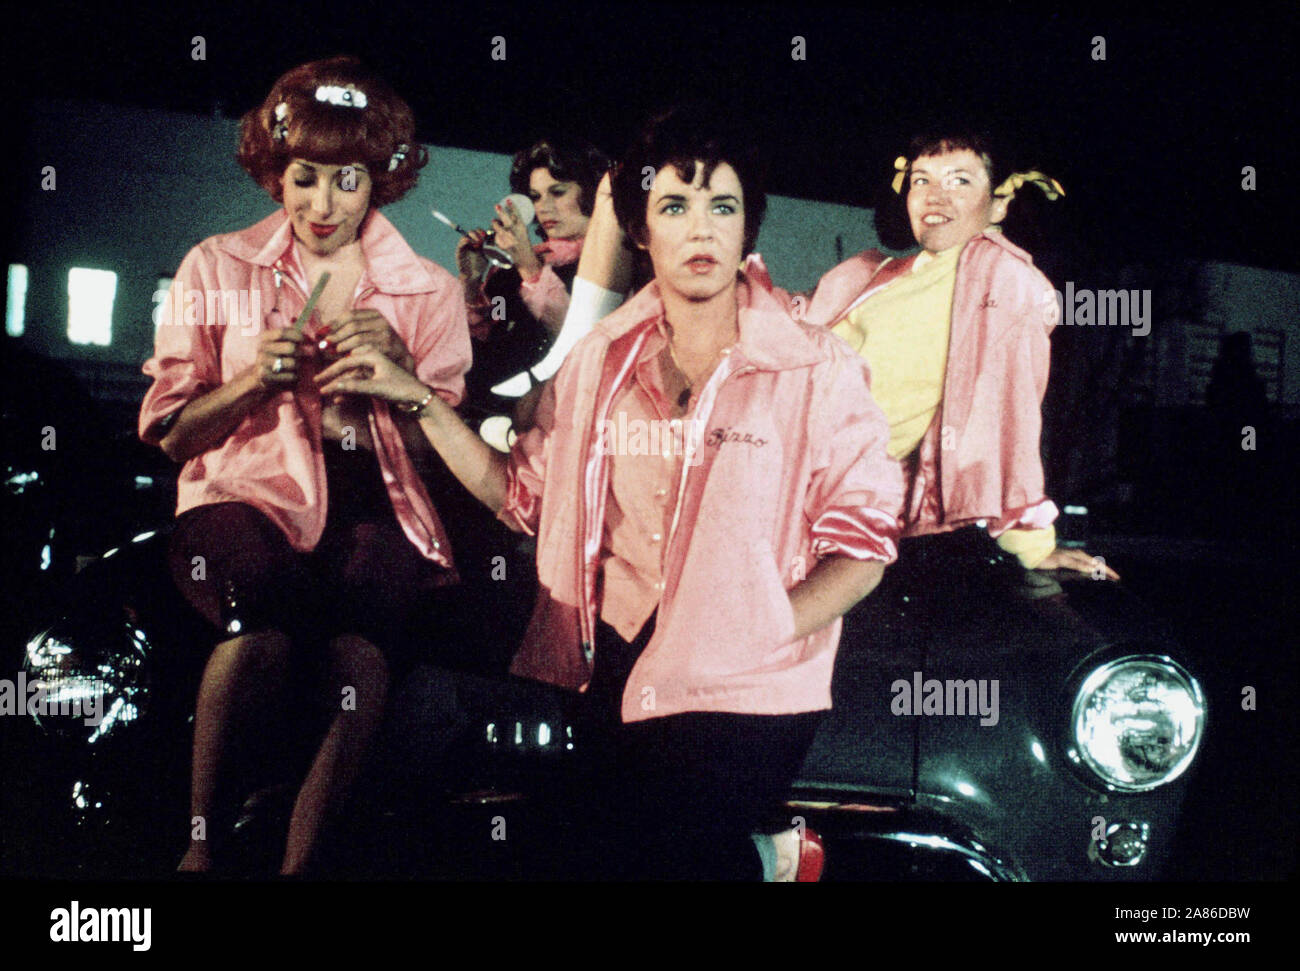 DONNELLY,CHANNING,MANOFF,CONN, GREASE, 1978 Stock Photo